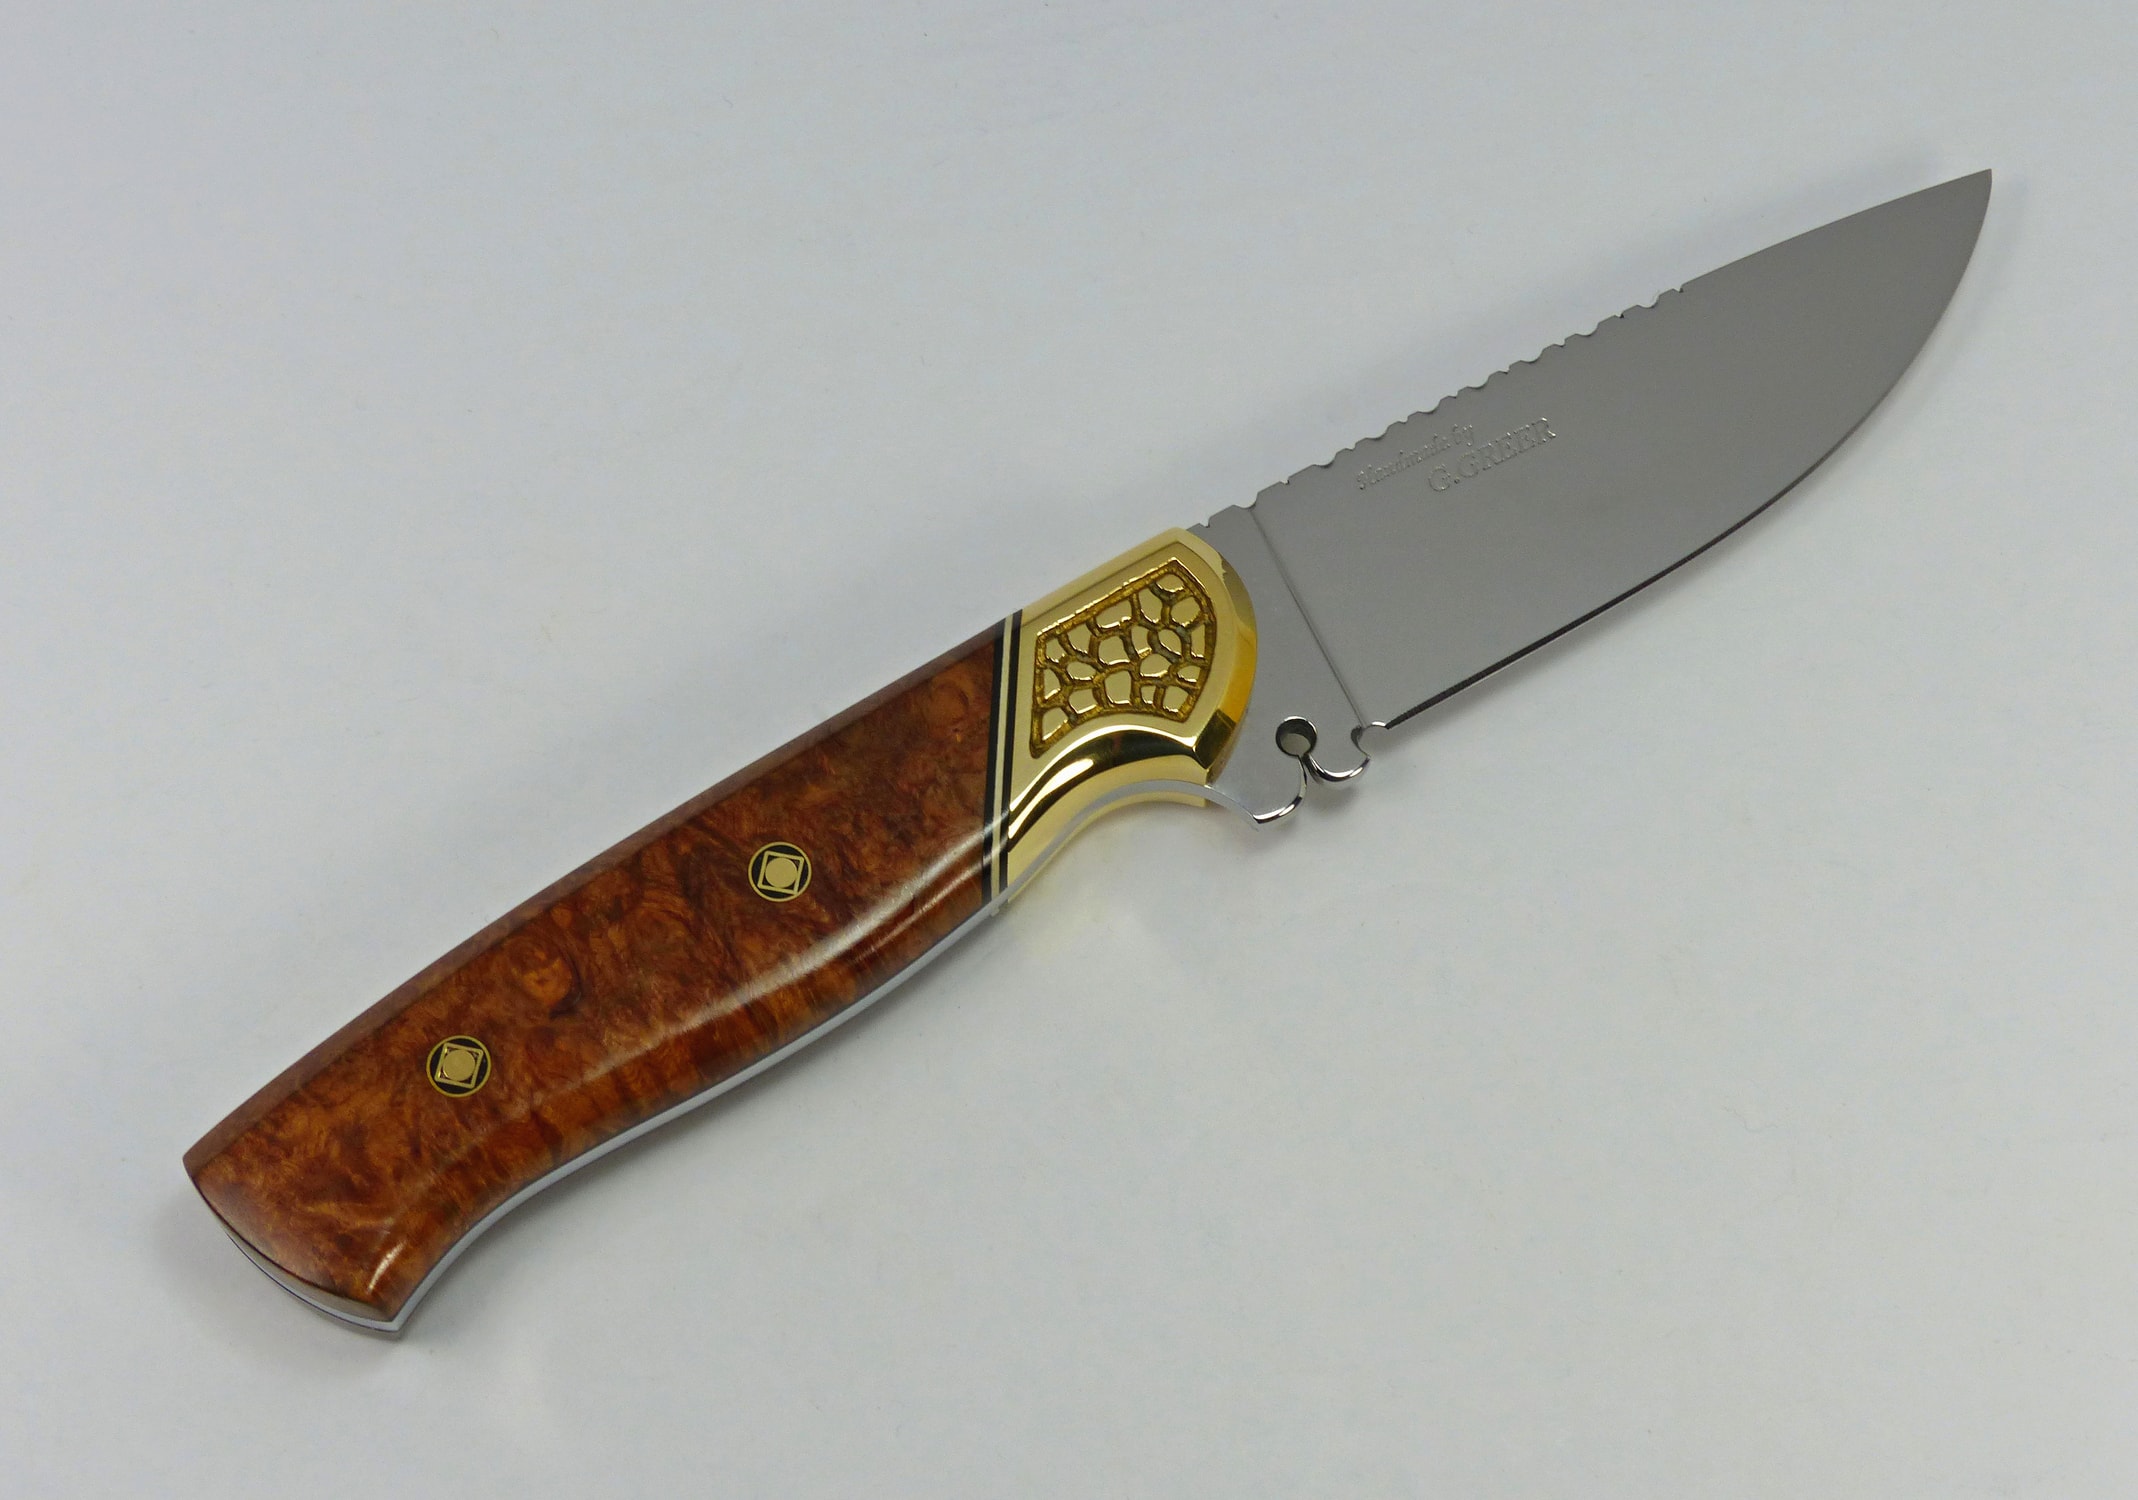 Burled elm art knife with sculptured brass bolsters and pierced ricasso